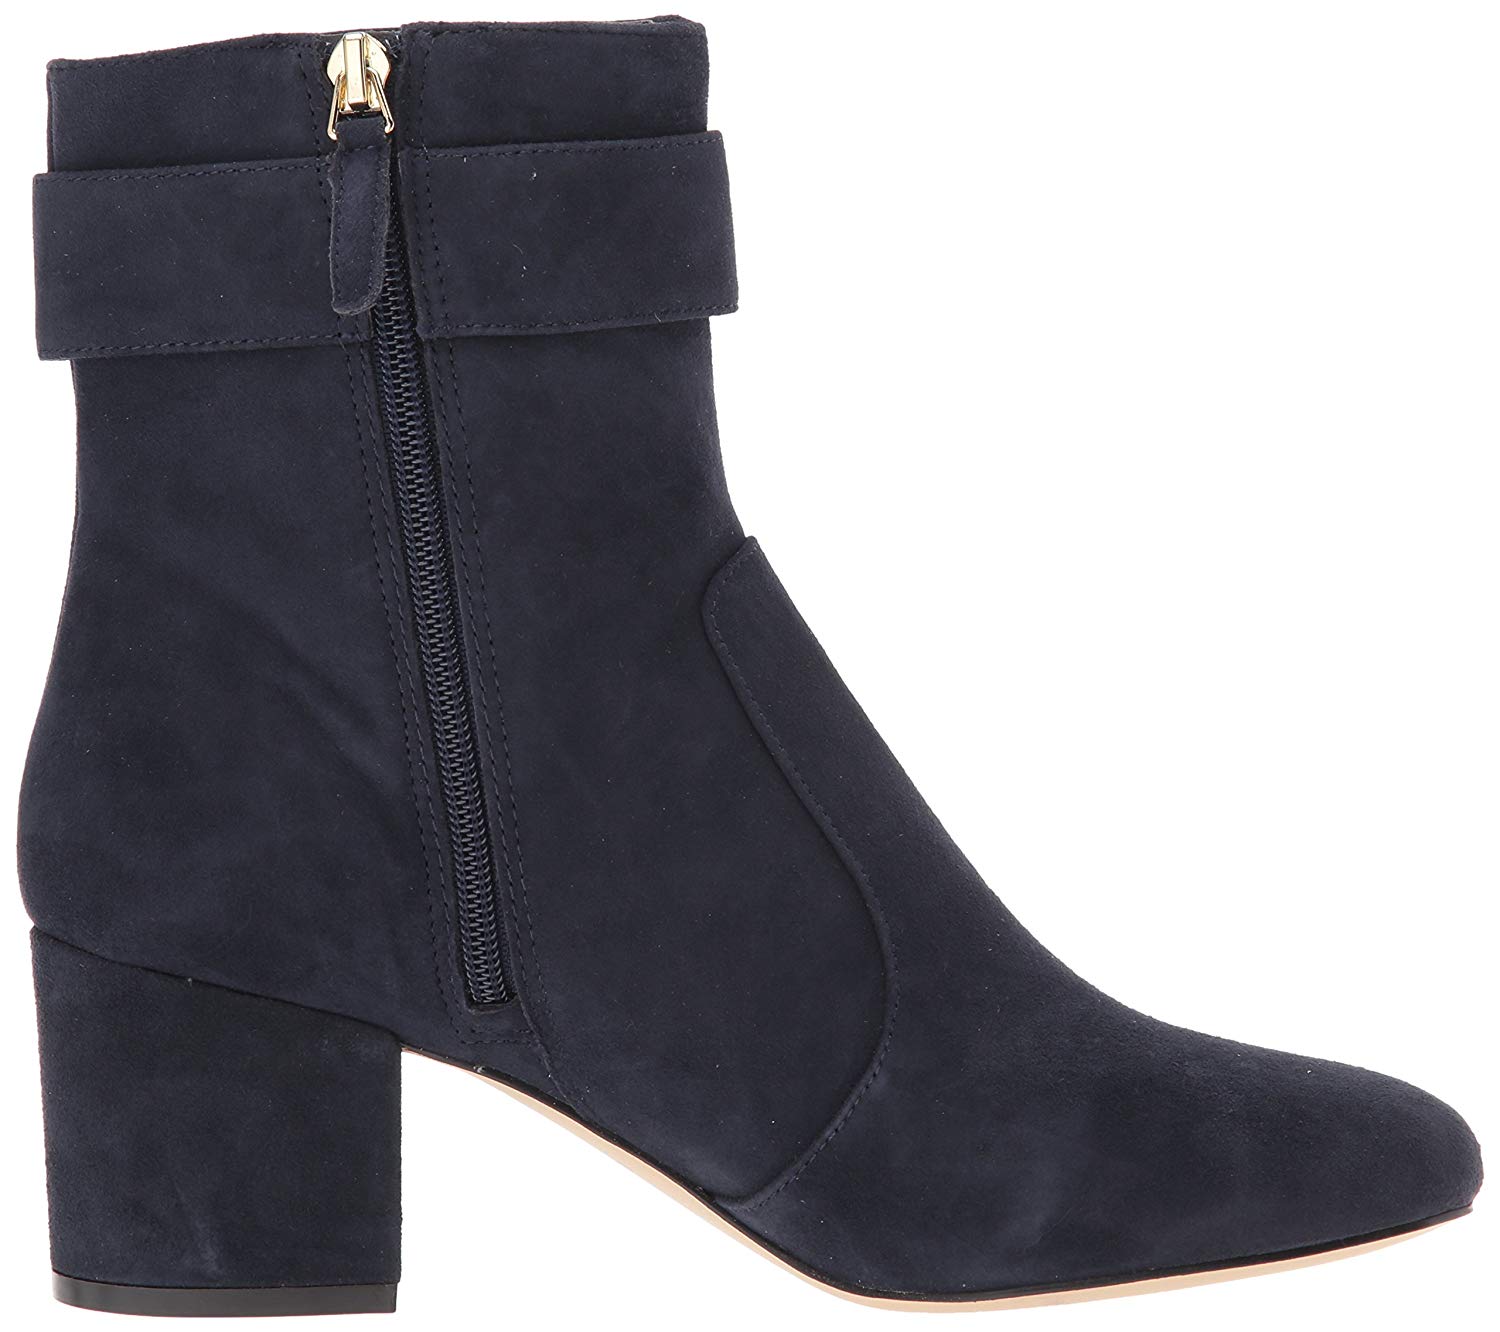 Nine West Womens Quilby Leather Almond Toe Ankle Fashion, Navy Suede